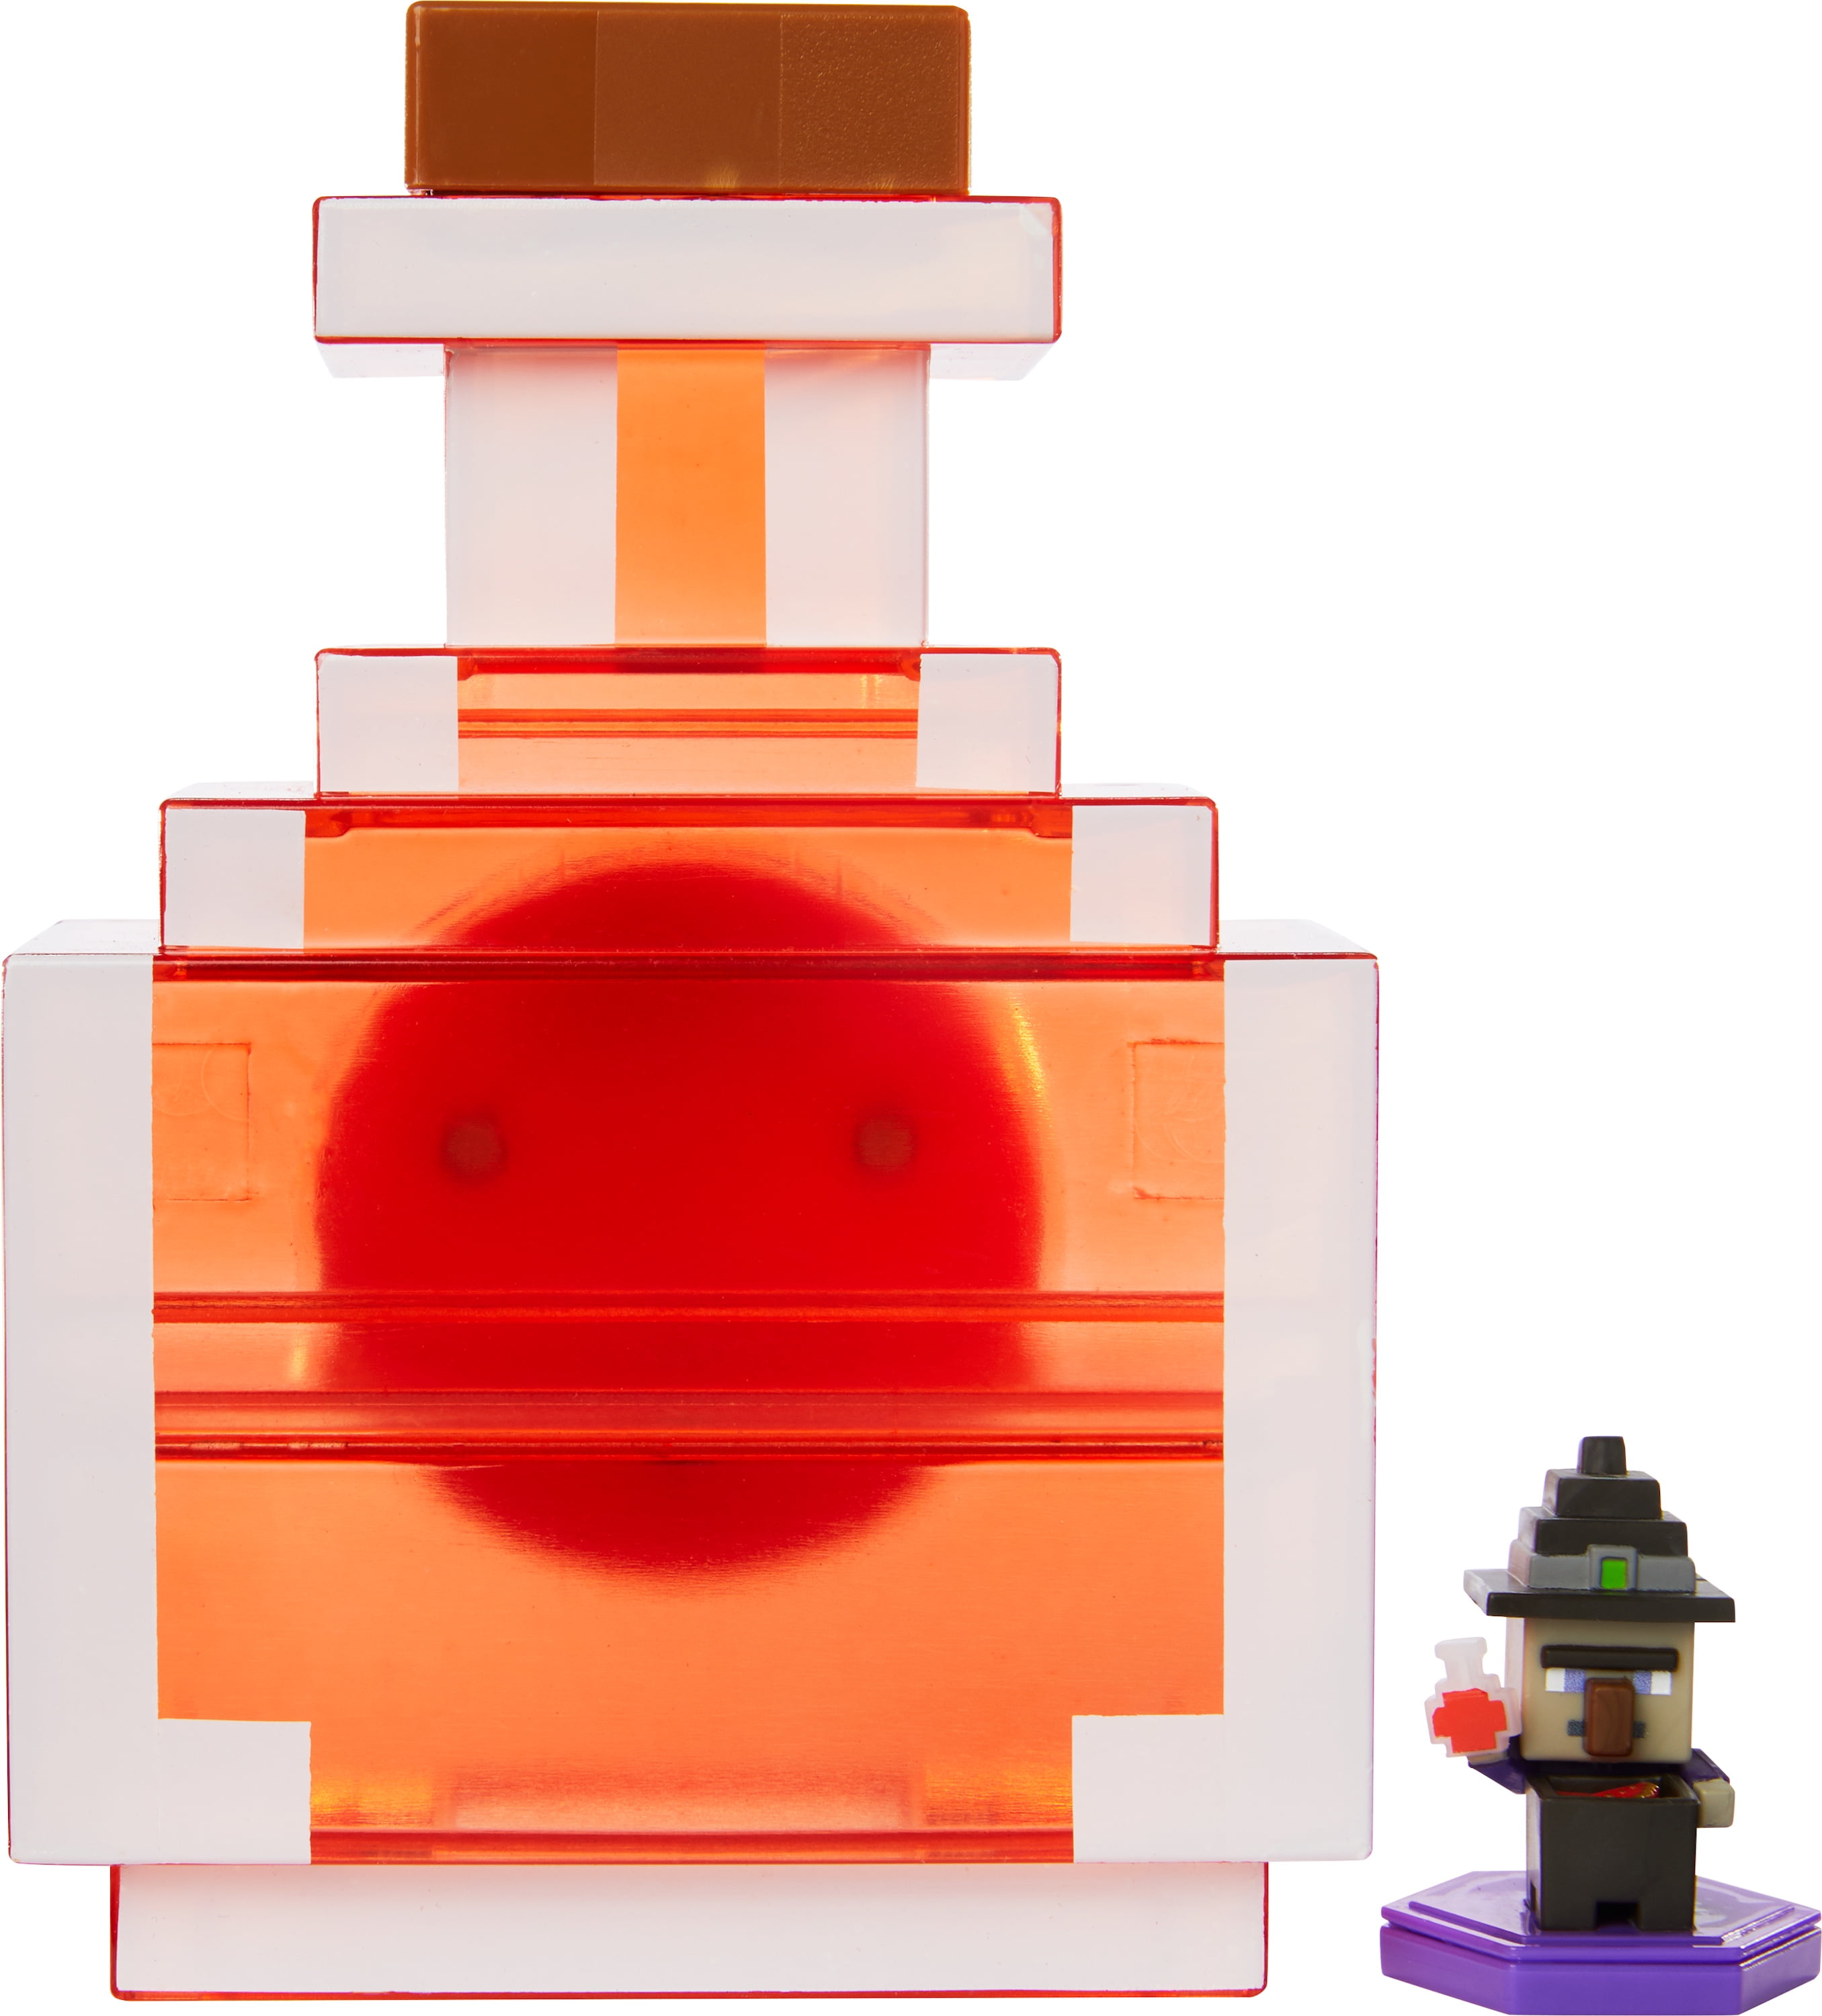 Roblox Series 6 4sci Mini Figure With Orange Cube And Online Code No Packaging Walmart Com Walmart Com - roblox series 6 4sci 3 mini figure with orange cube and online code loose jazwares toywiz